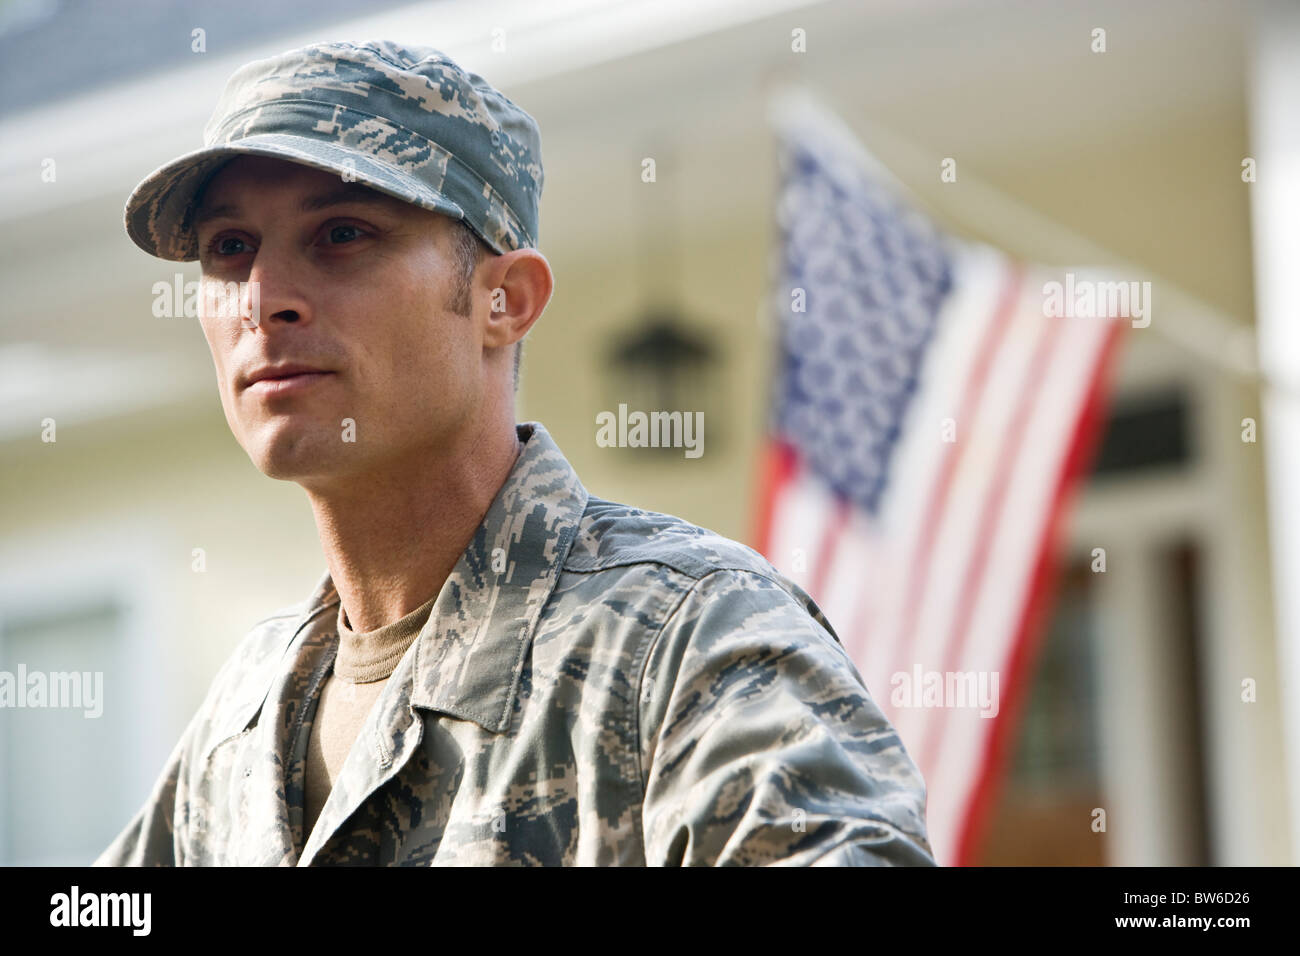 Mid-adult man in military uniform, American Flag in background Stock Photo